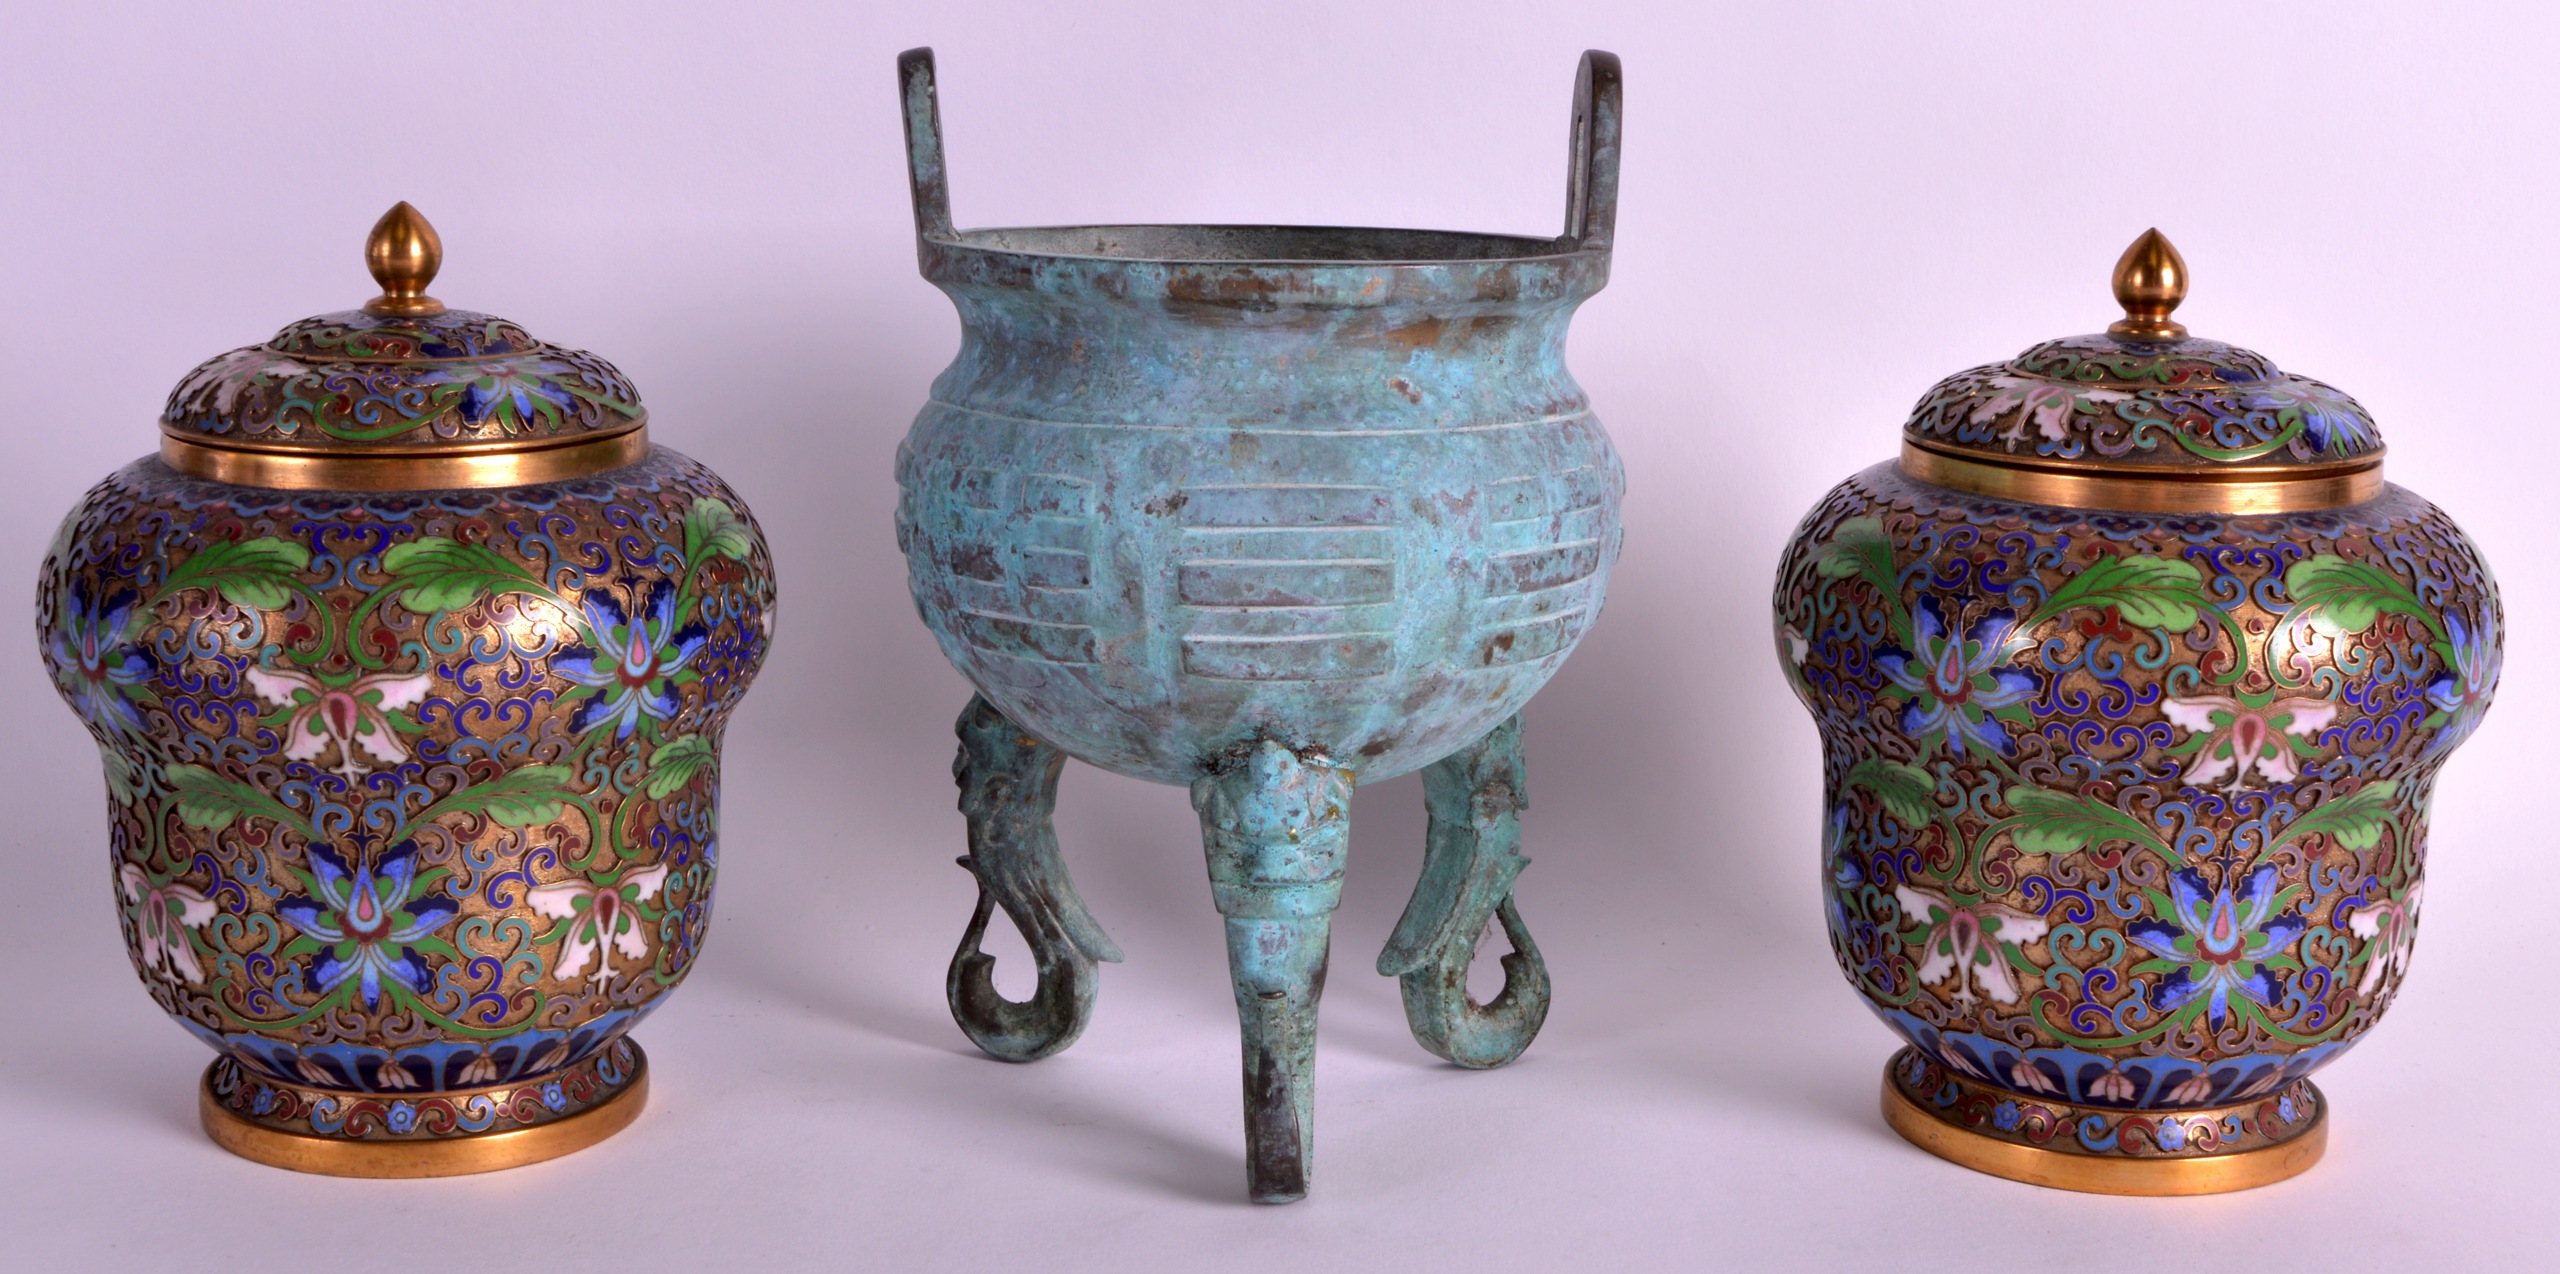 A PAIR OF EARLY 20TH CENTURY CHINESE CLOISONNE ENAMEL VASES AND COVERS together with an Archaic